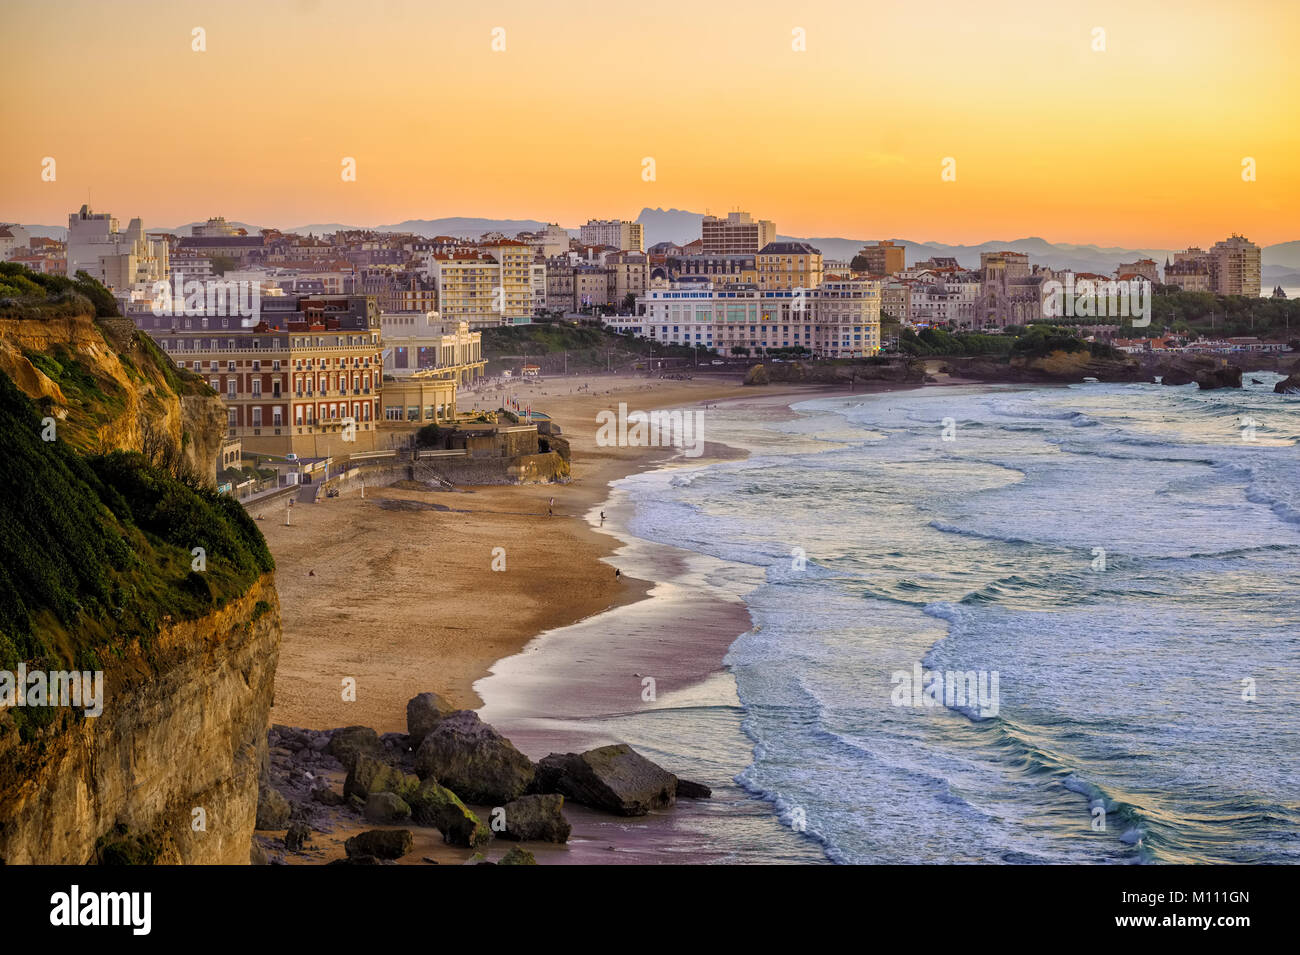 Biarritz city and its famous sand beaches - Miramar and La Grande Plage, Bay of Biscay, Atlantic coast, France Stock Photo